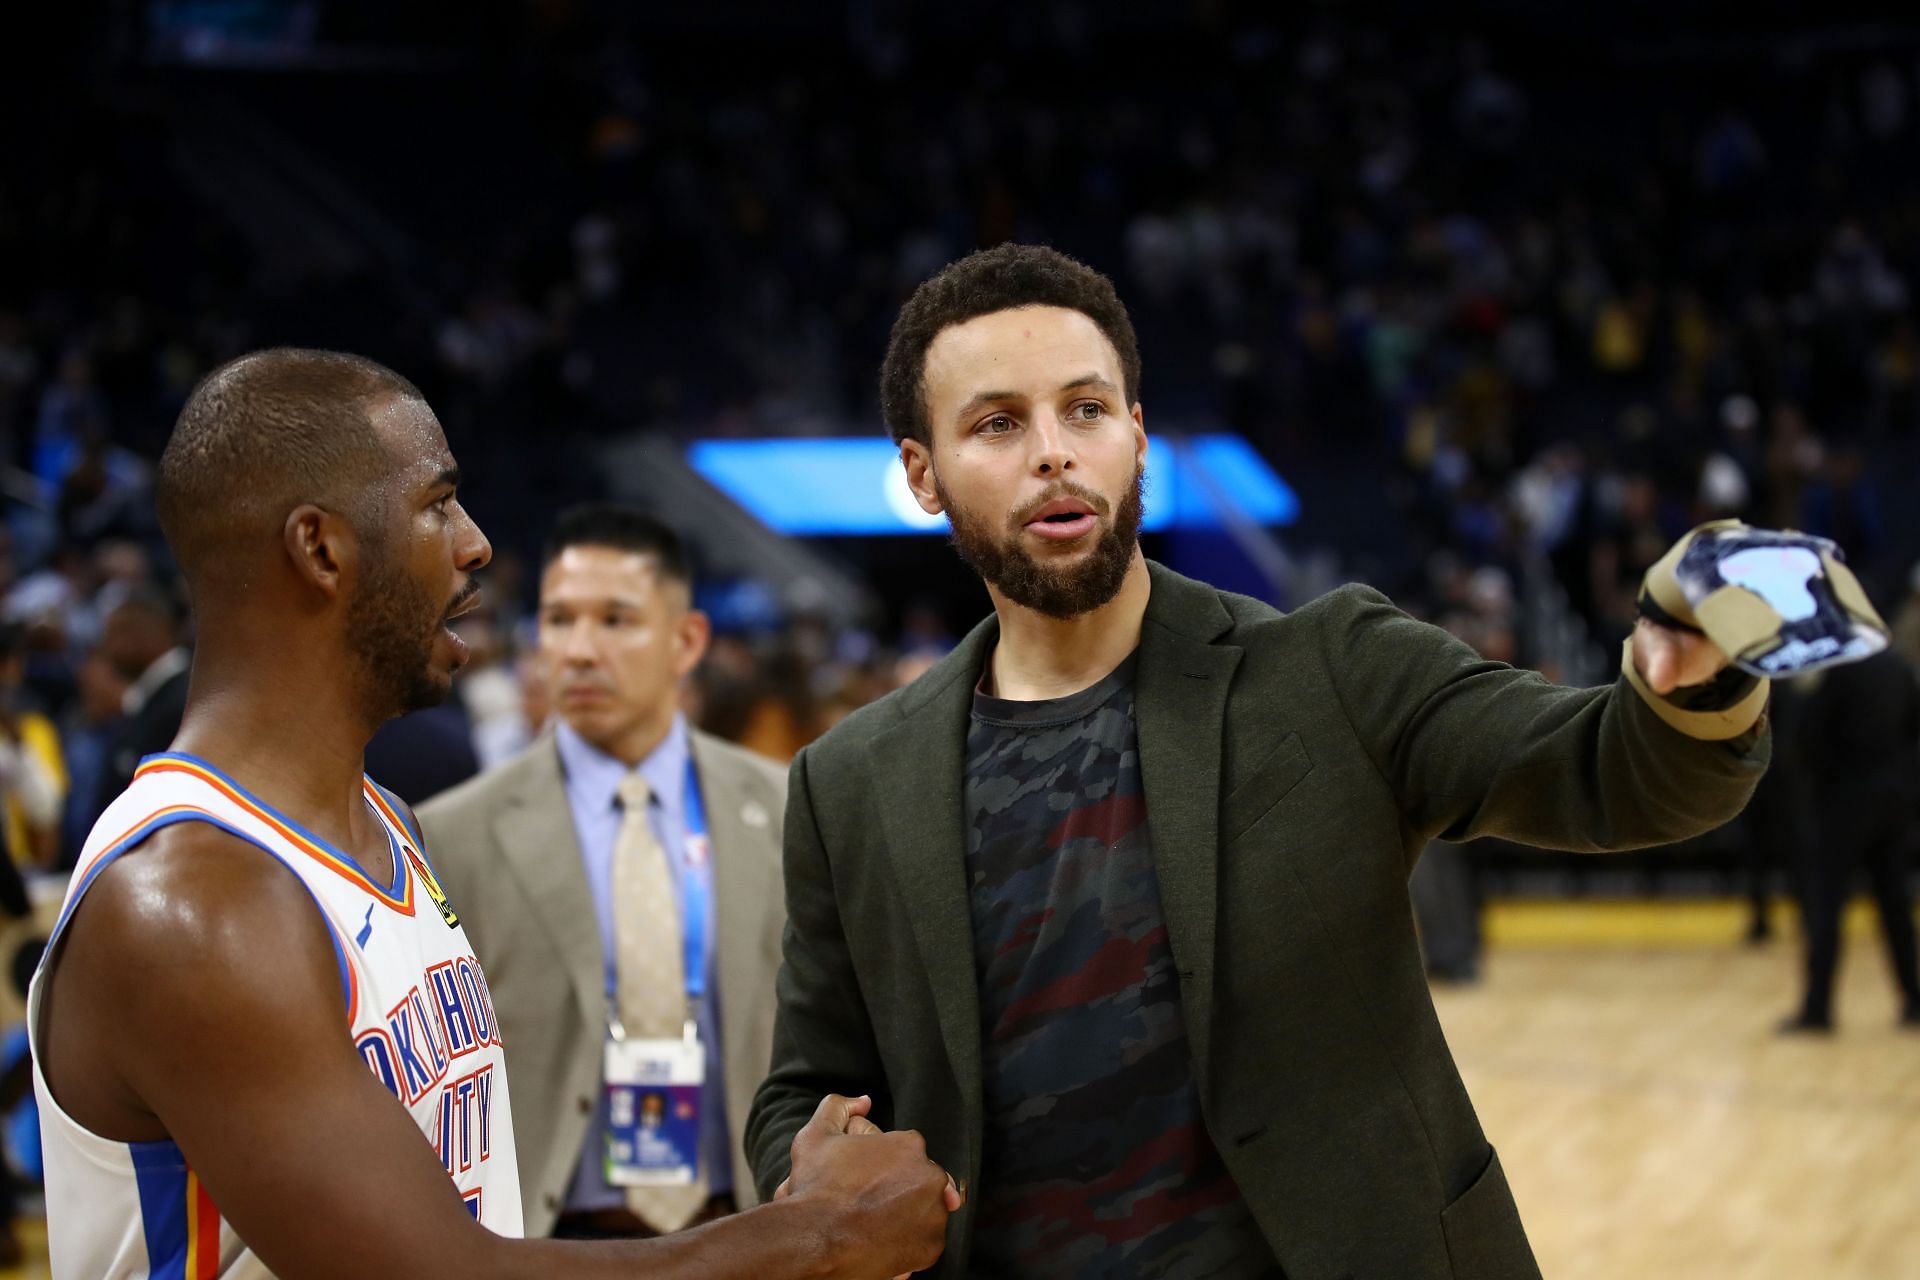 Chris Paul and Stephen Curry interact during an NBA game